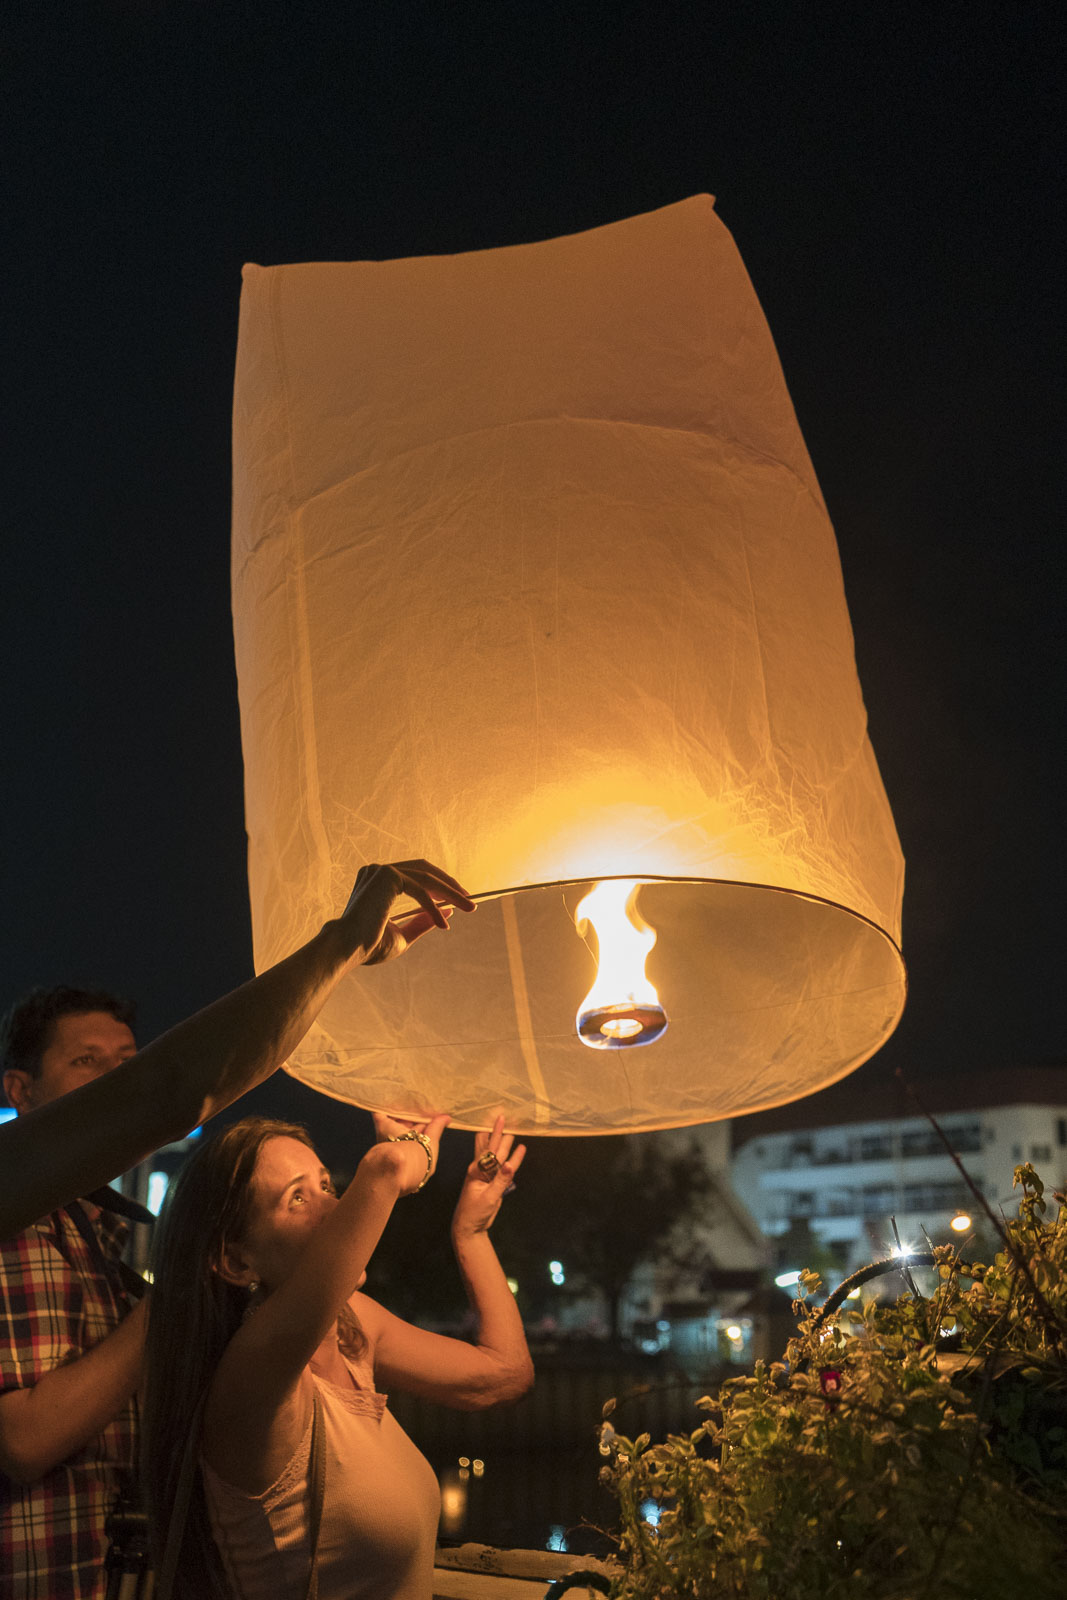 Lighting lanterns at the Yi Peng Festival in Chiang Mai Thailand